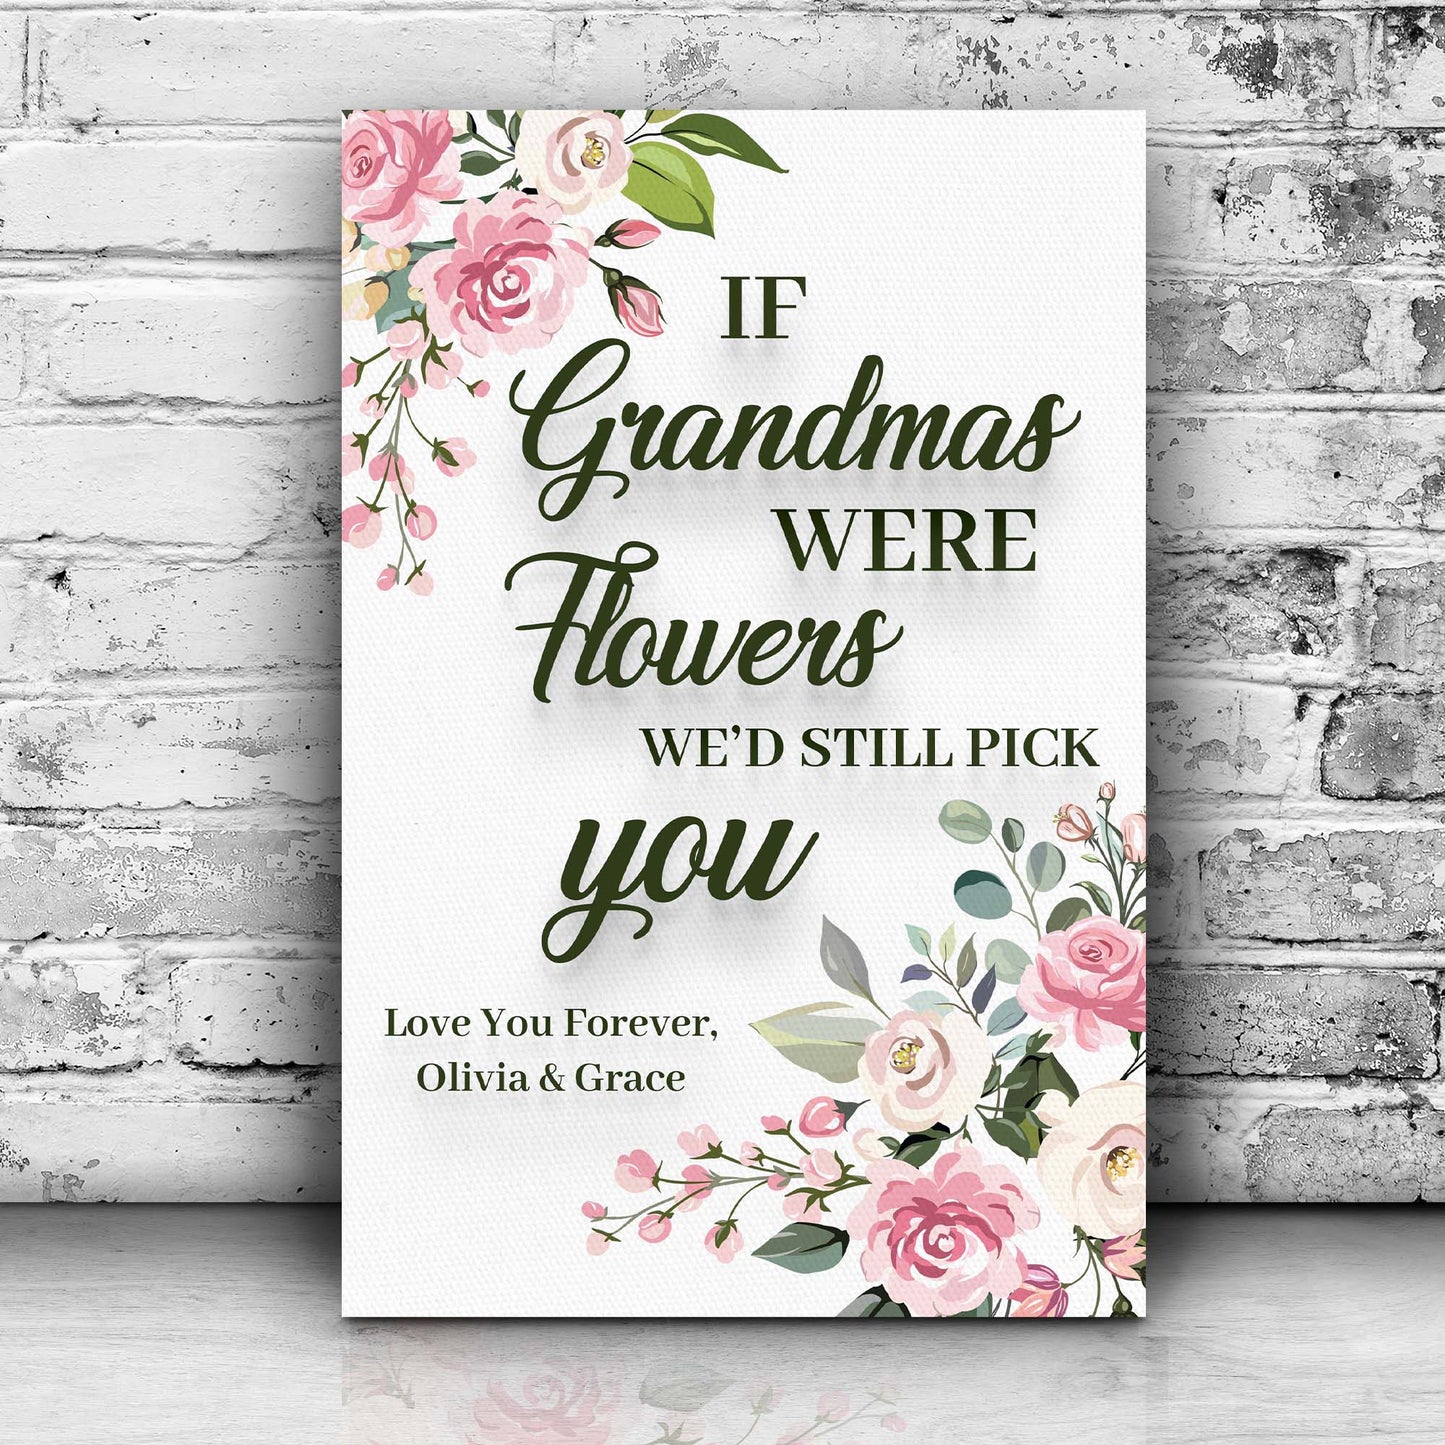 If Grandmas Were Flowers We'd Still Pick You Sign - Image by Tailored Canvases